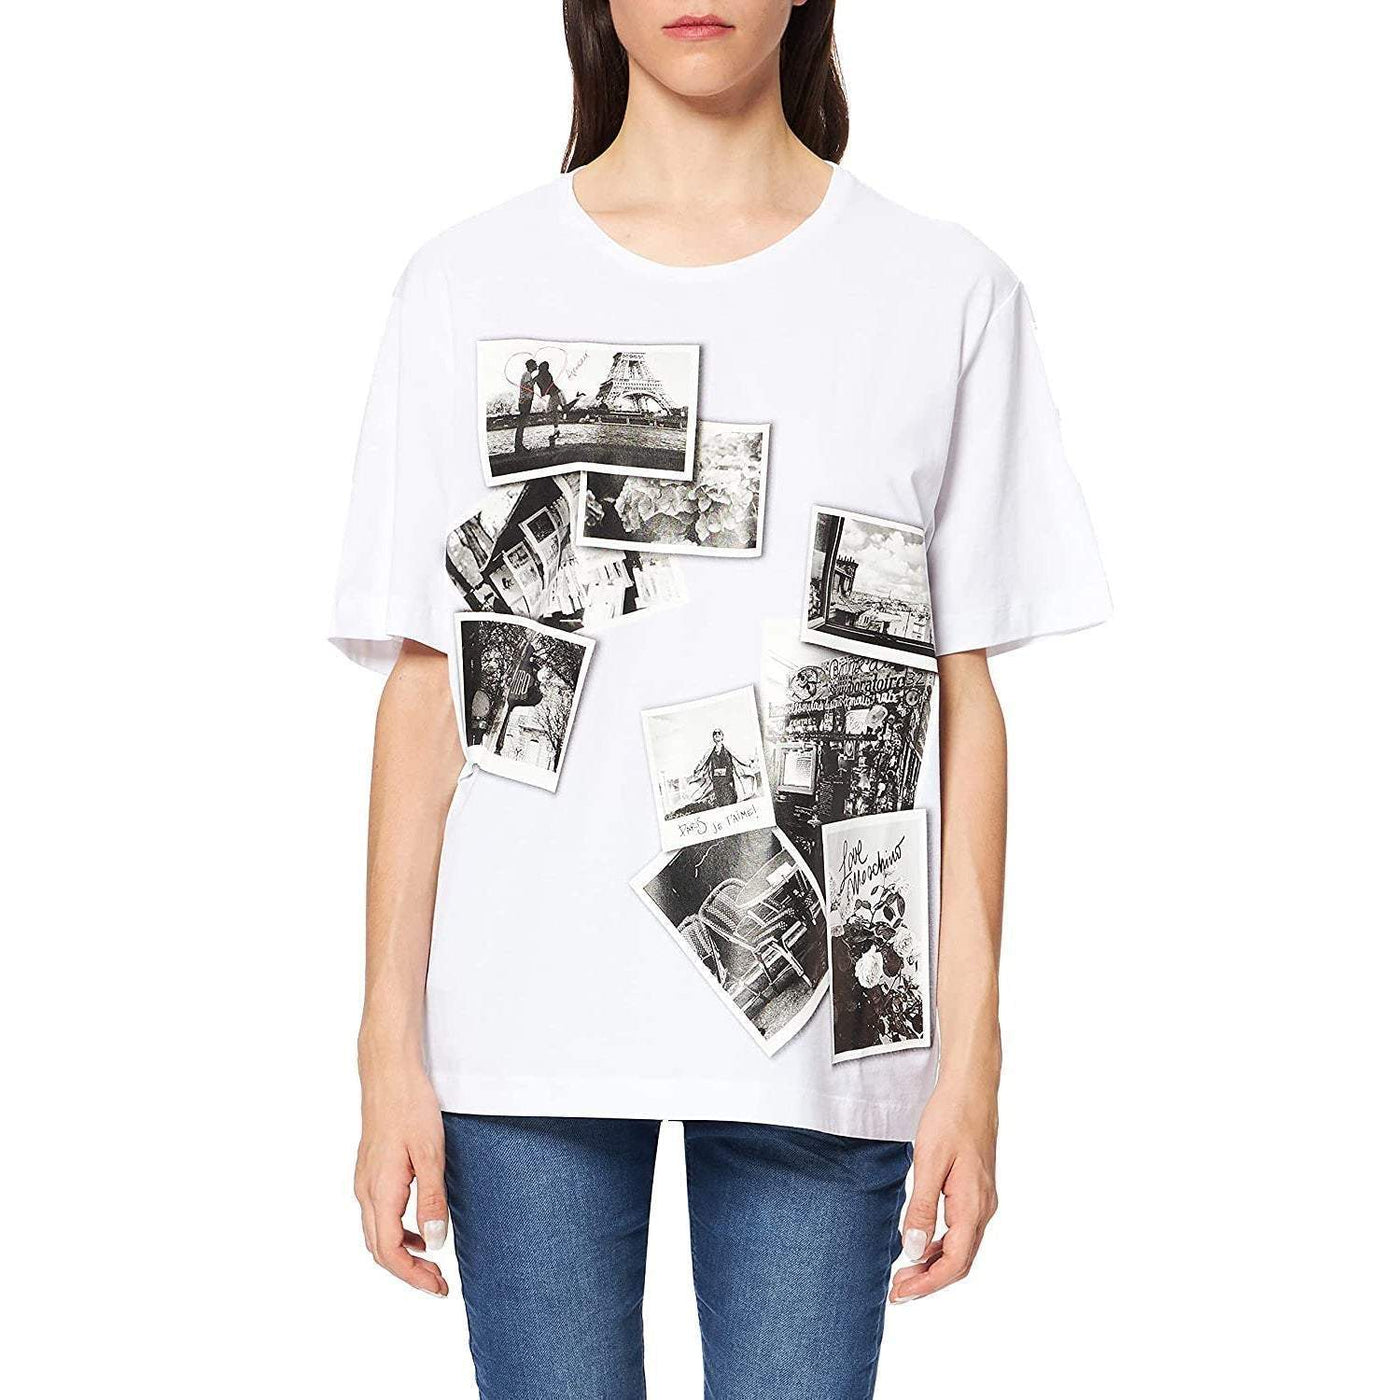 Love Moschino oversized photo printed  Tops & T-Shirt feed-agegroup-adult, feed-color-White, feed-gender-female, IT38|XS, IT40|S, IT42|M, IT44|L, Love Moschino, Tops & T-Shirts - Women - Clothing, White at SEYMAYKA